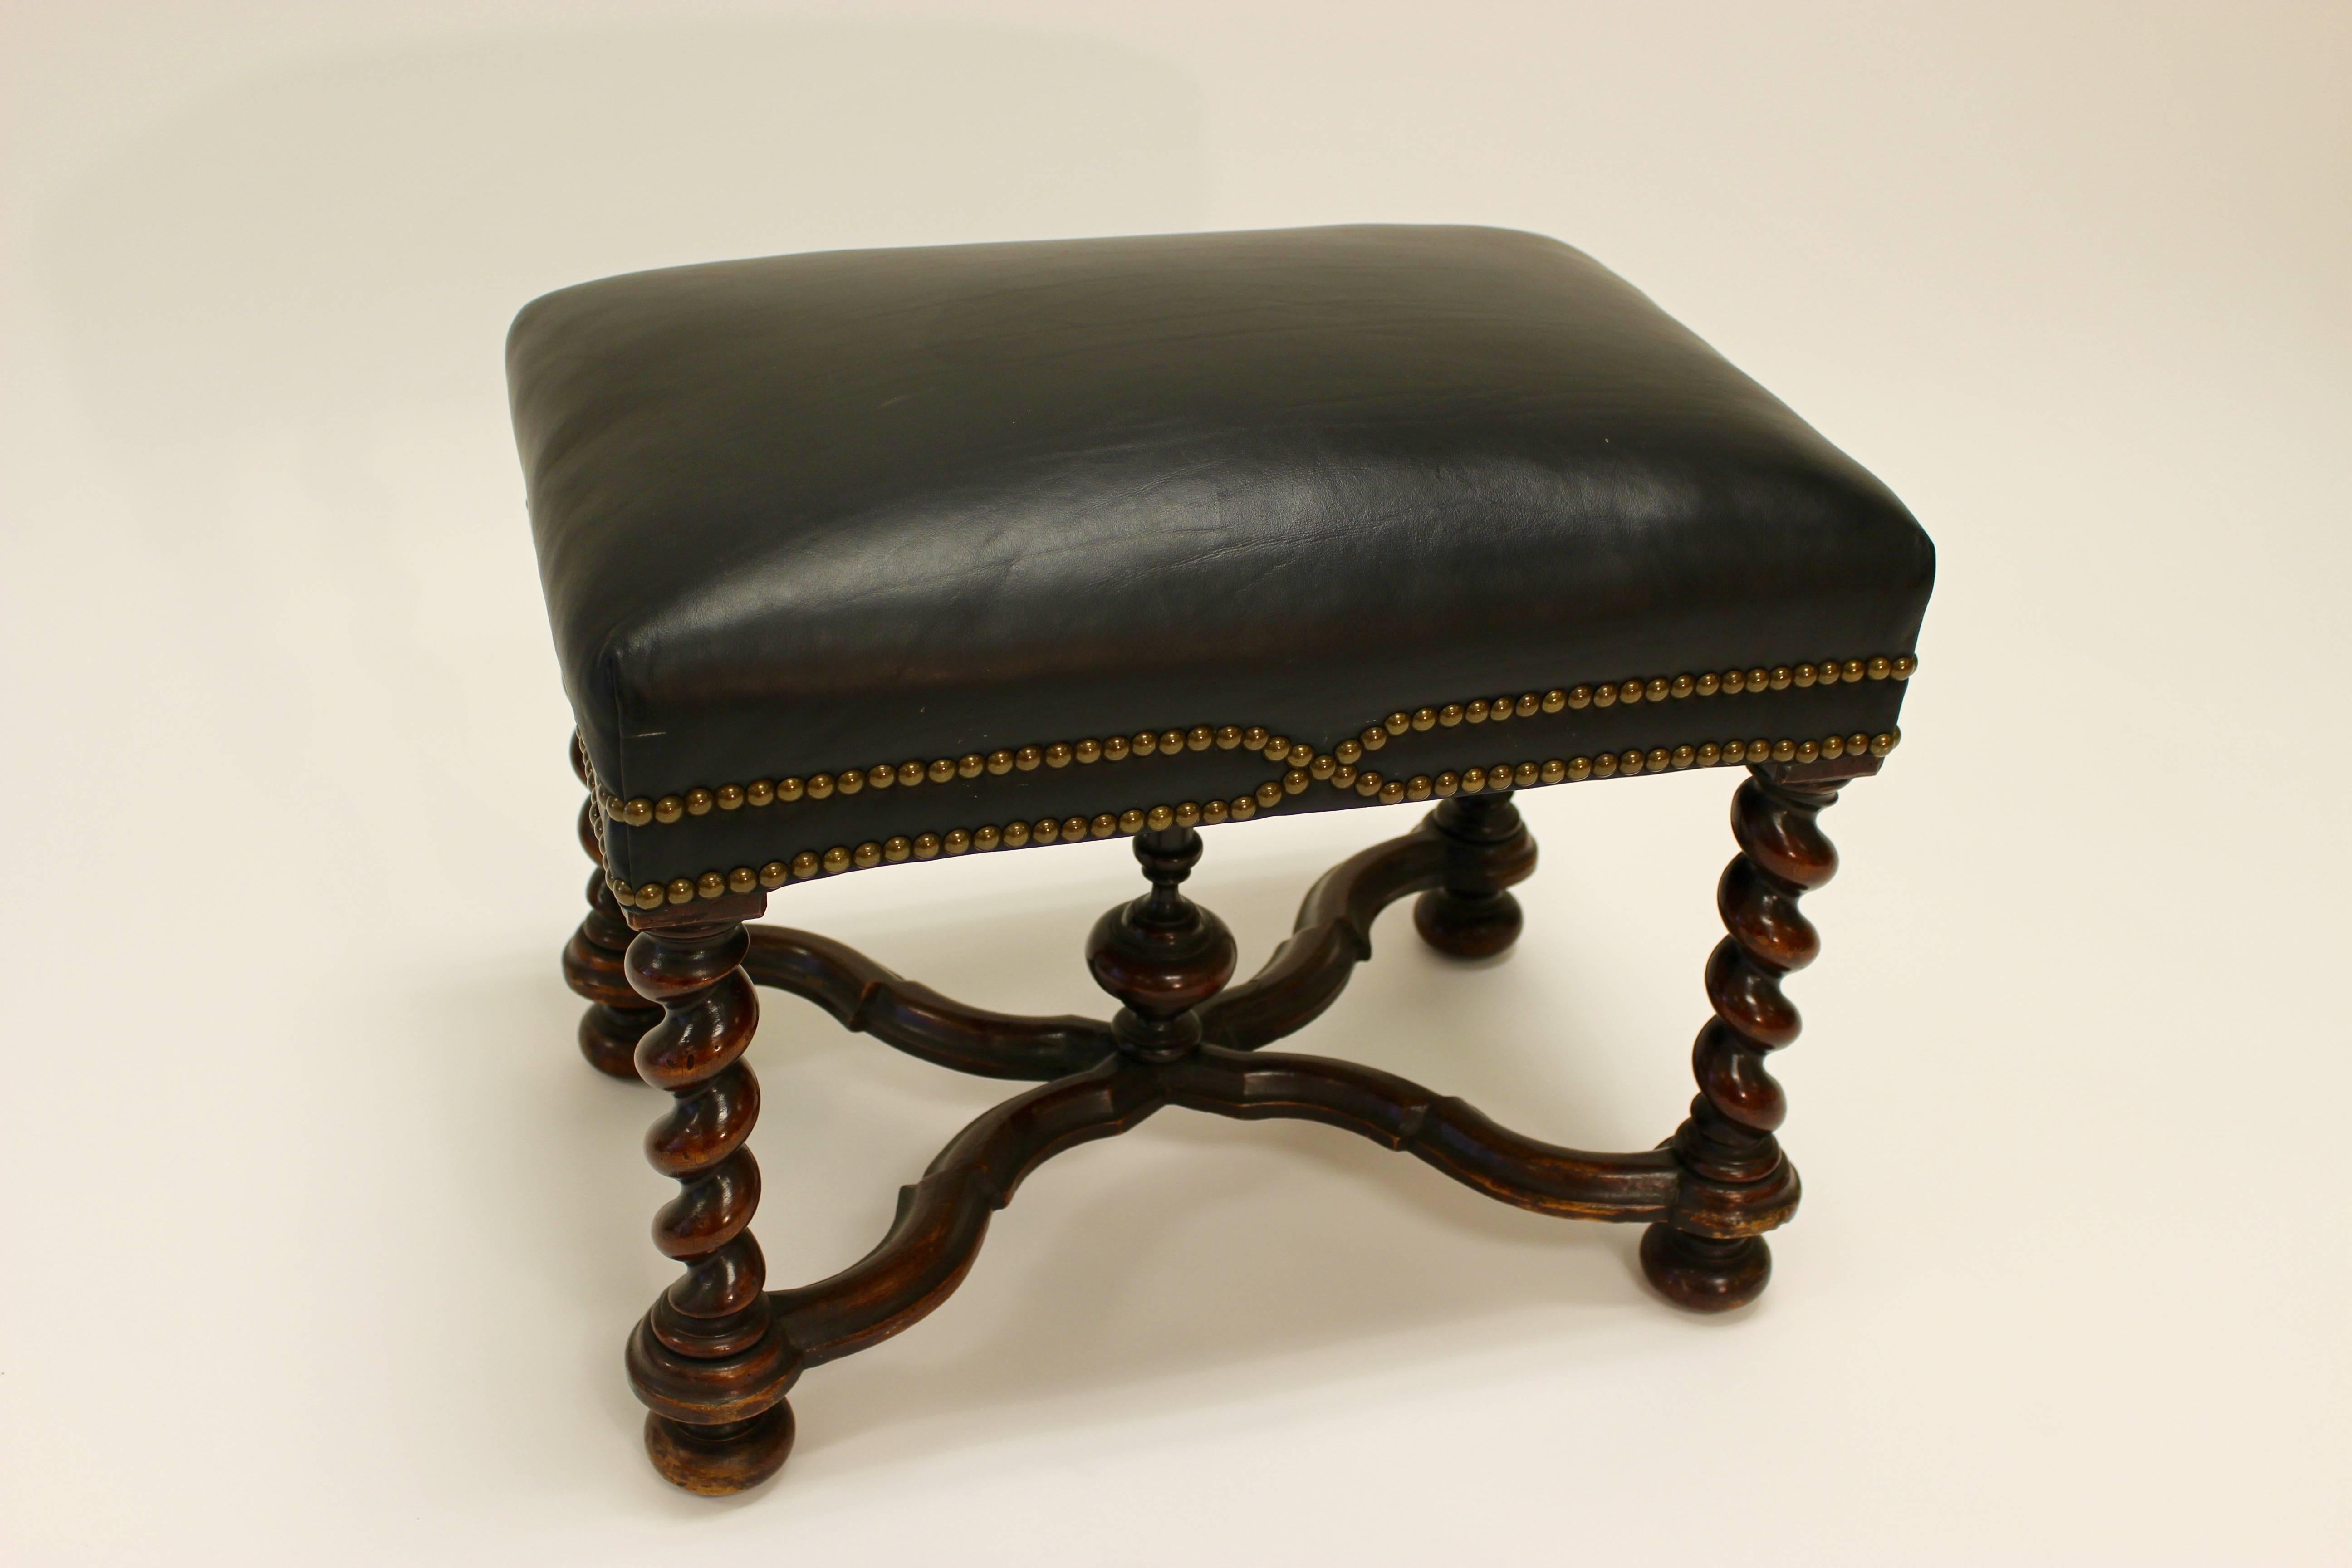 A William and Mary style leather upholstered bench from the 20th century with brass nailhead trim, barley twist base and cross stretcher. This walnut stool features a rectangular dark leather upholstered seat, raised on an exquisite base made of